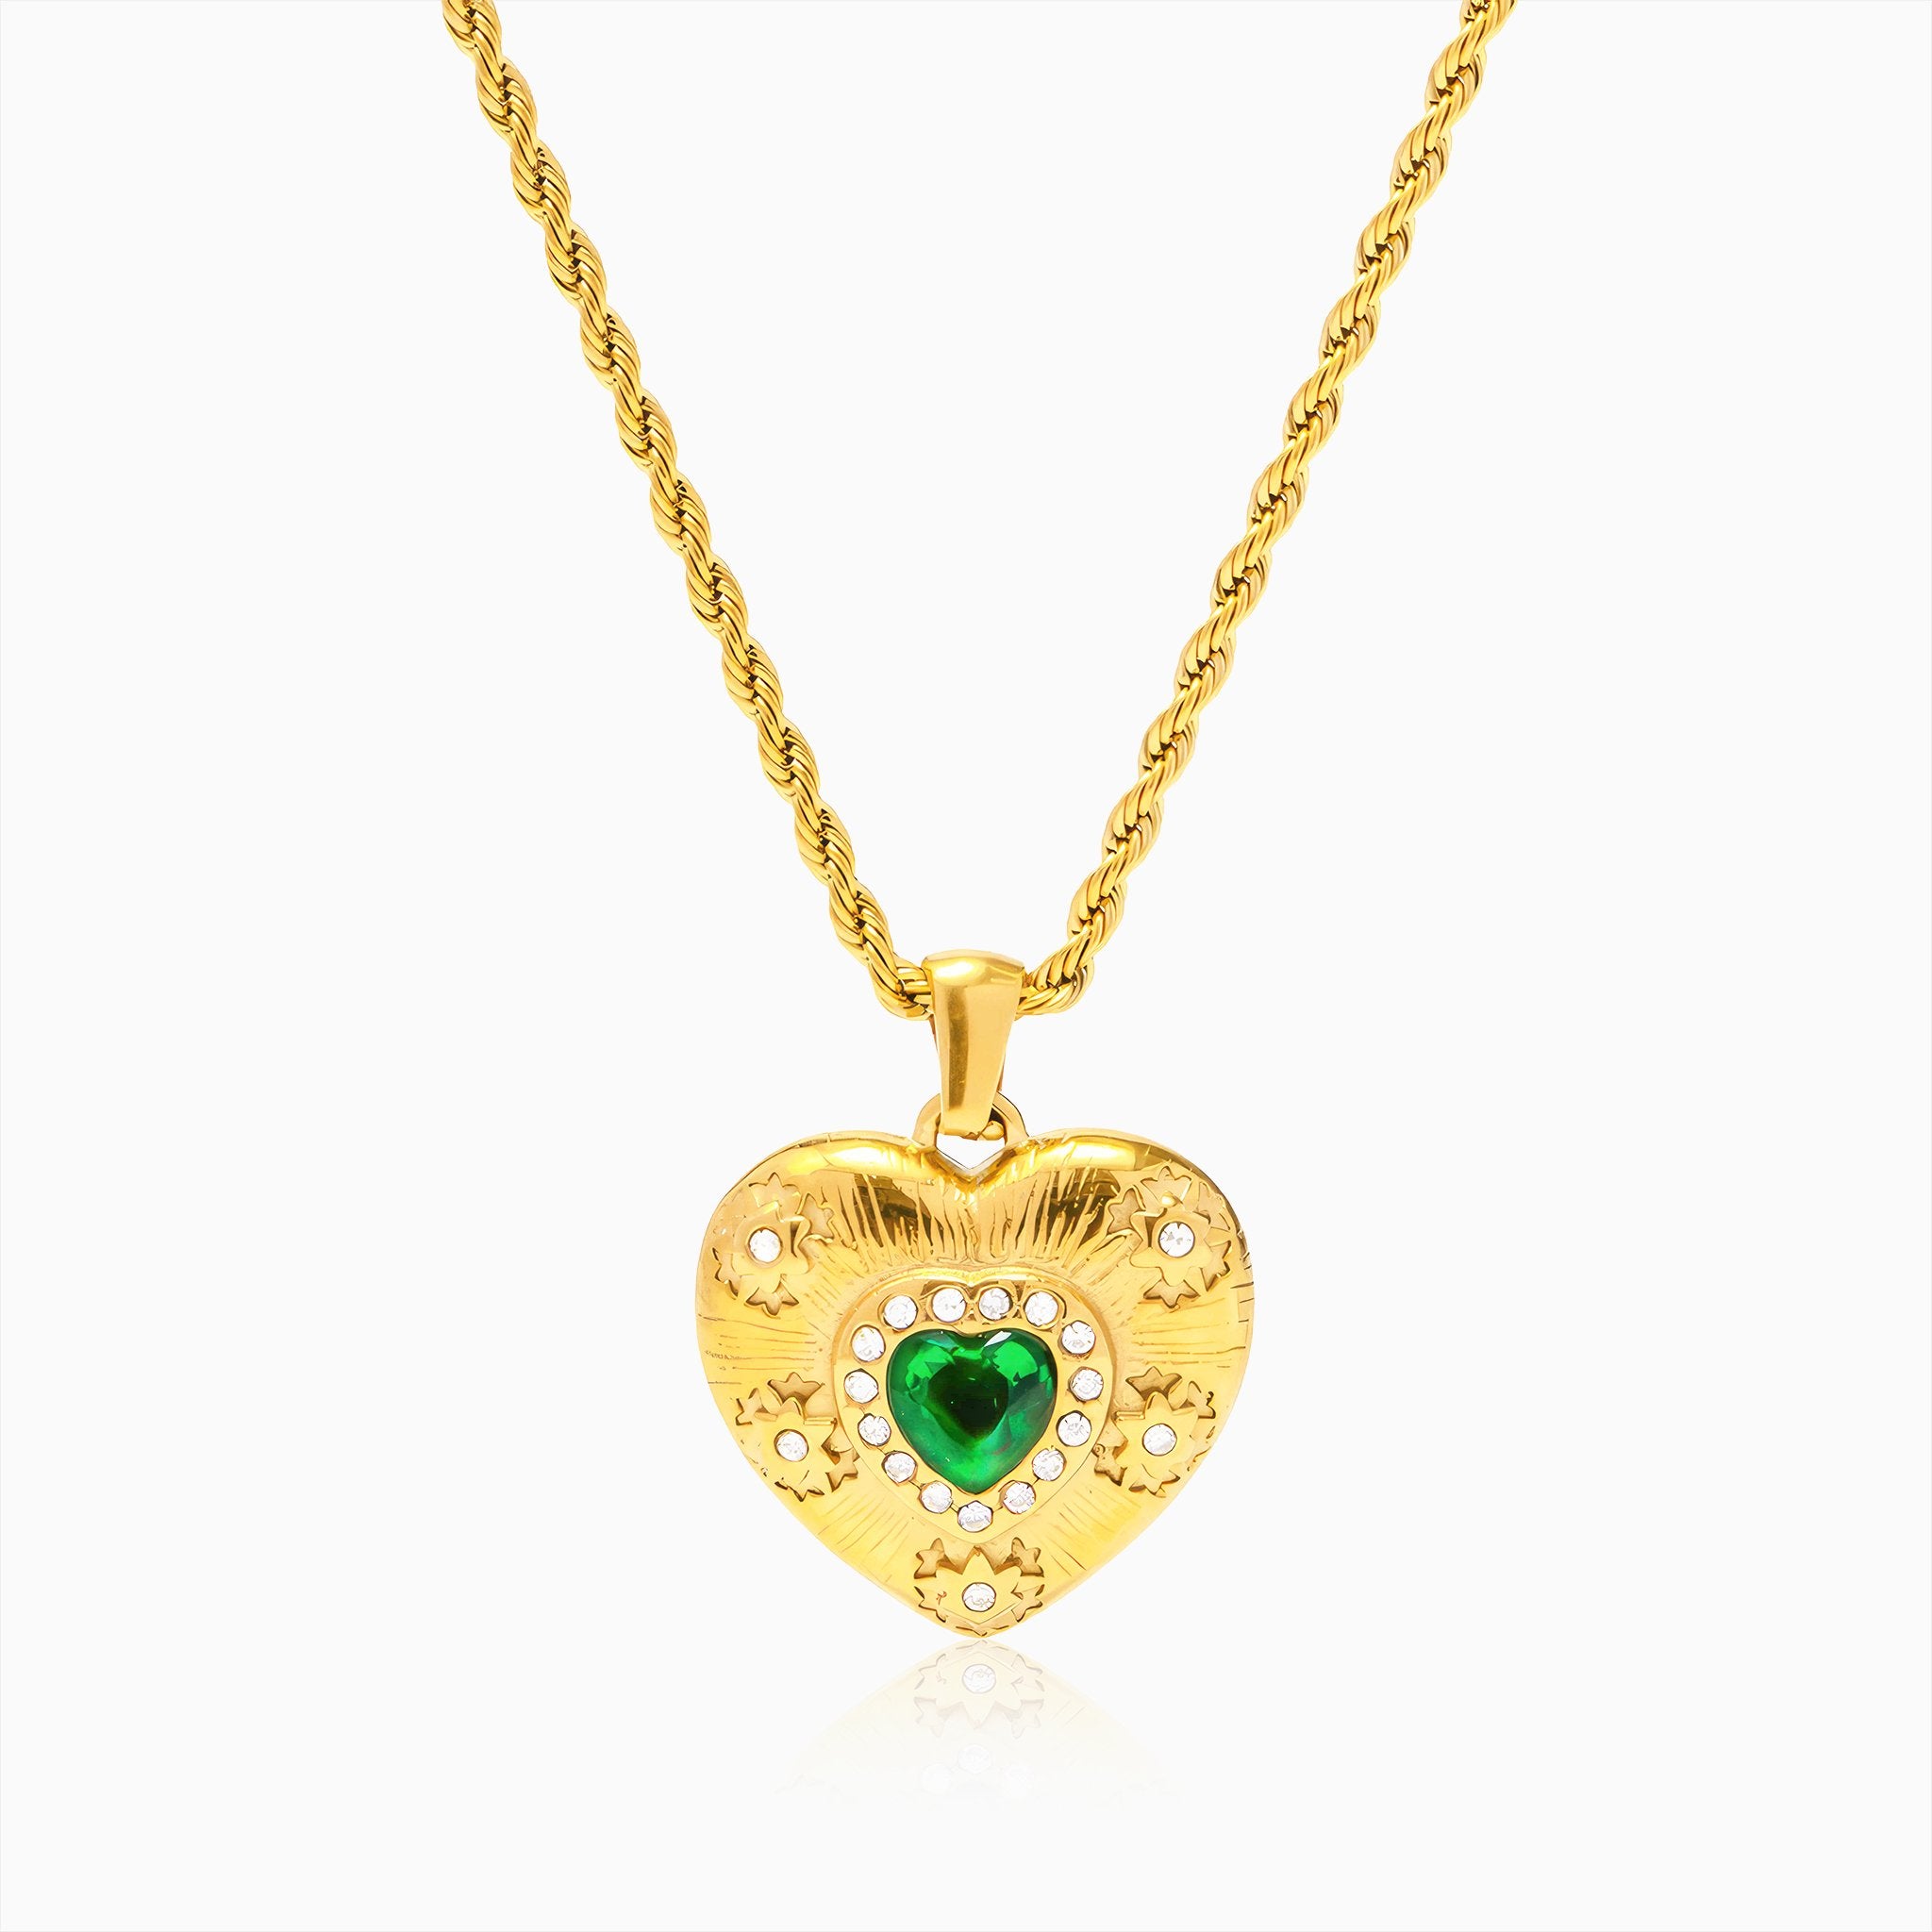 Emerald Heart Pendant Necklace - Nobbier - Necklace - 18K Gold And Titanium PVD Coated Jewelry